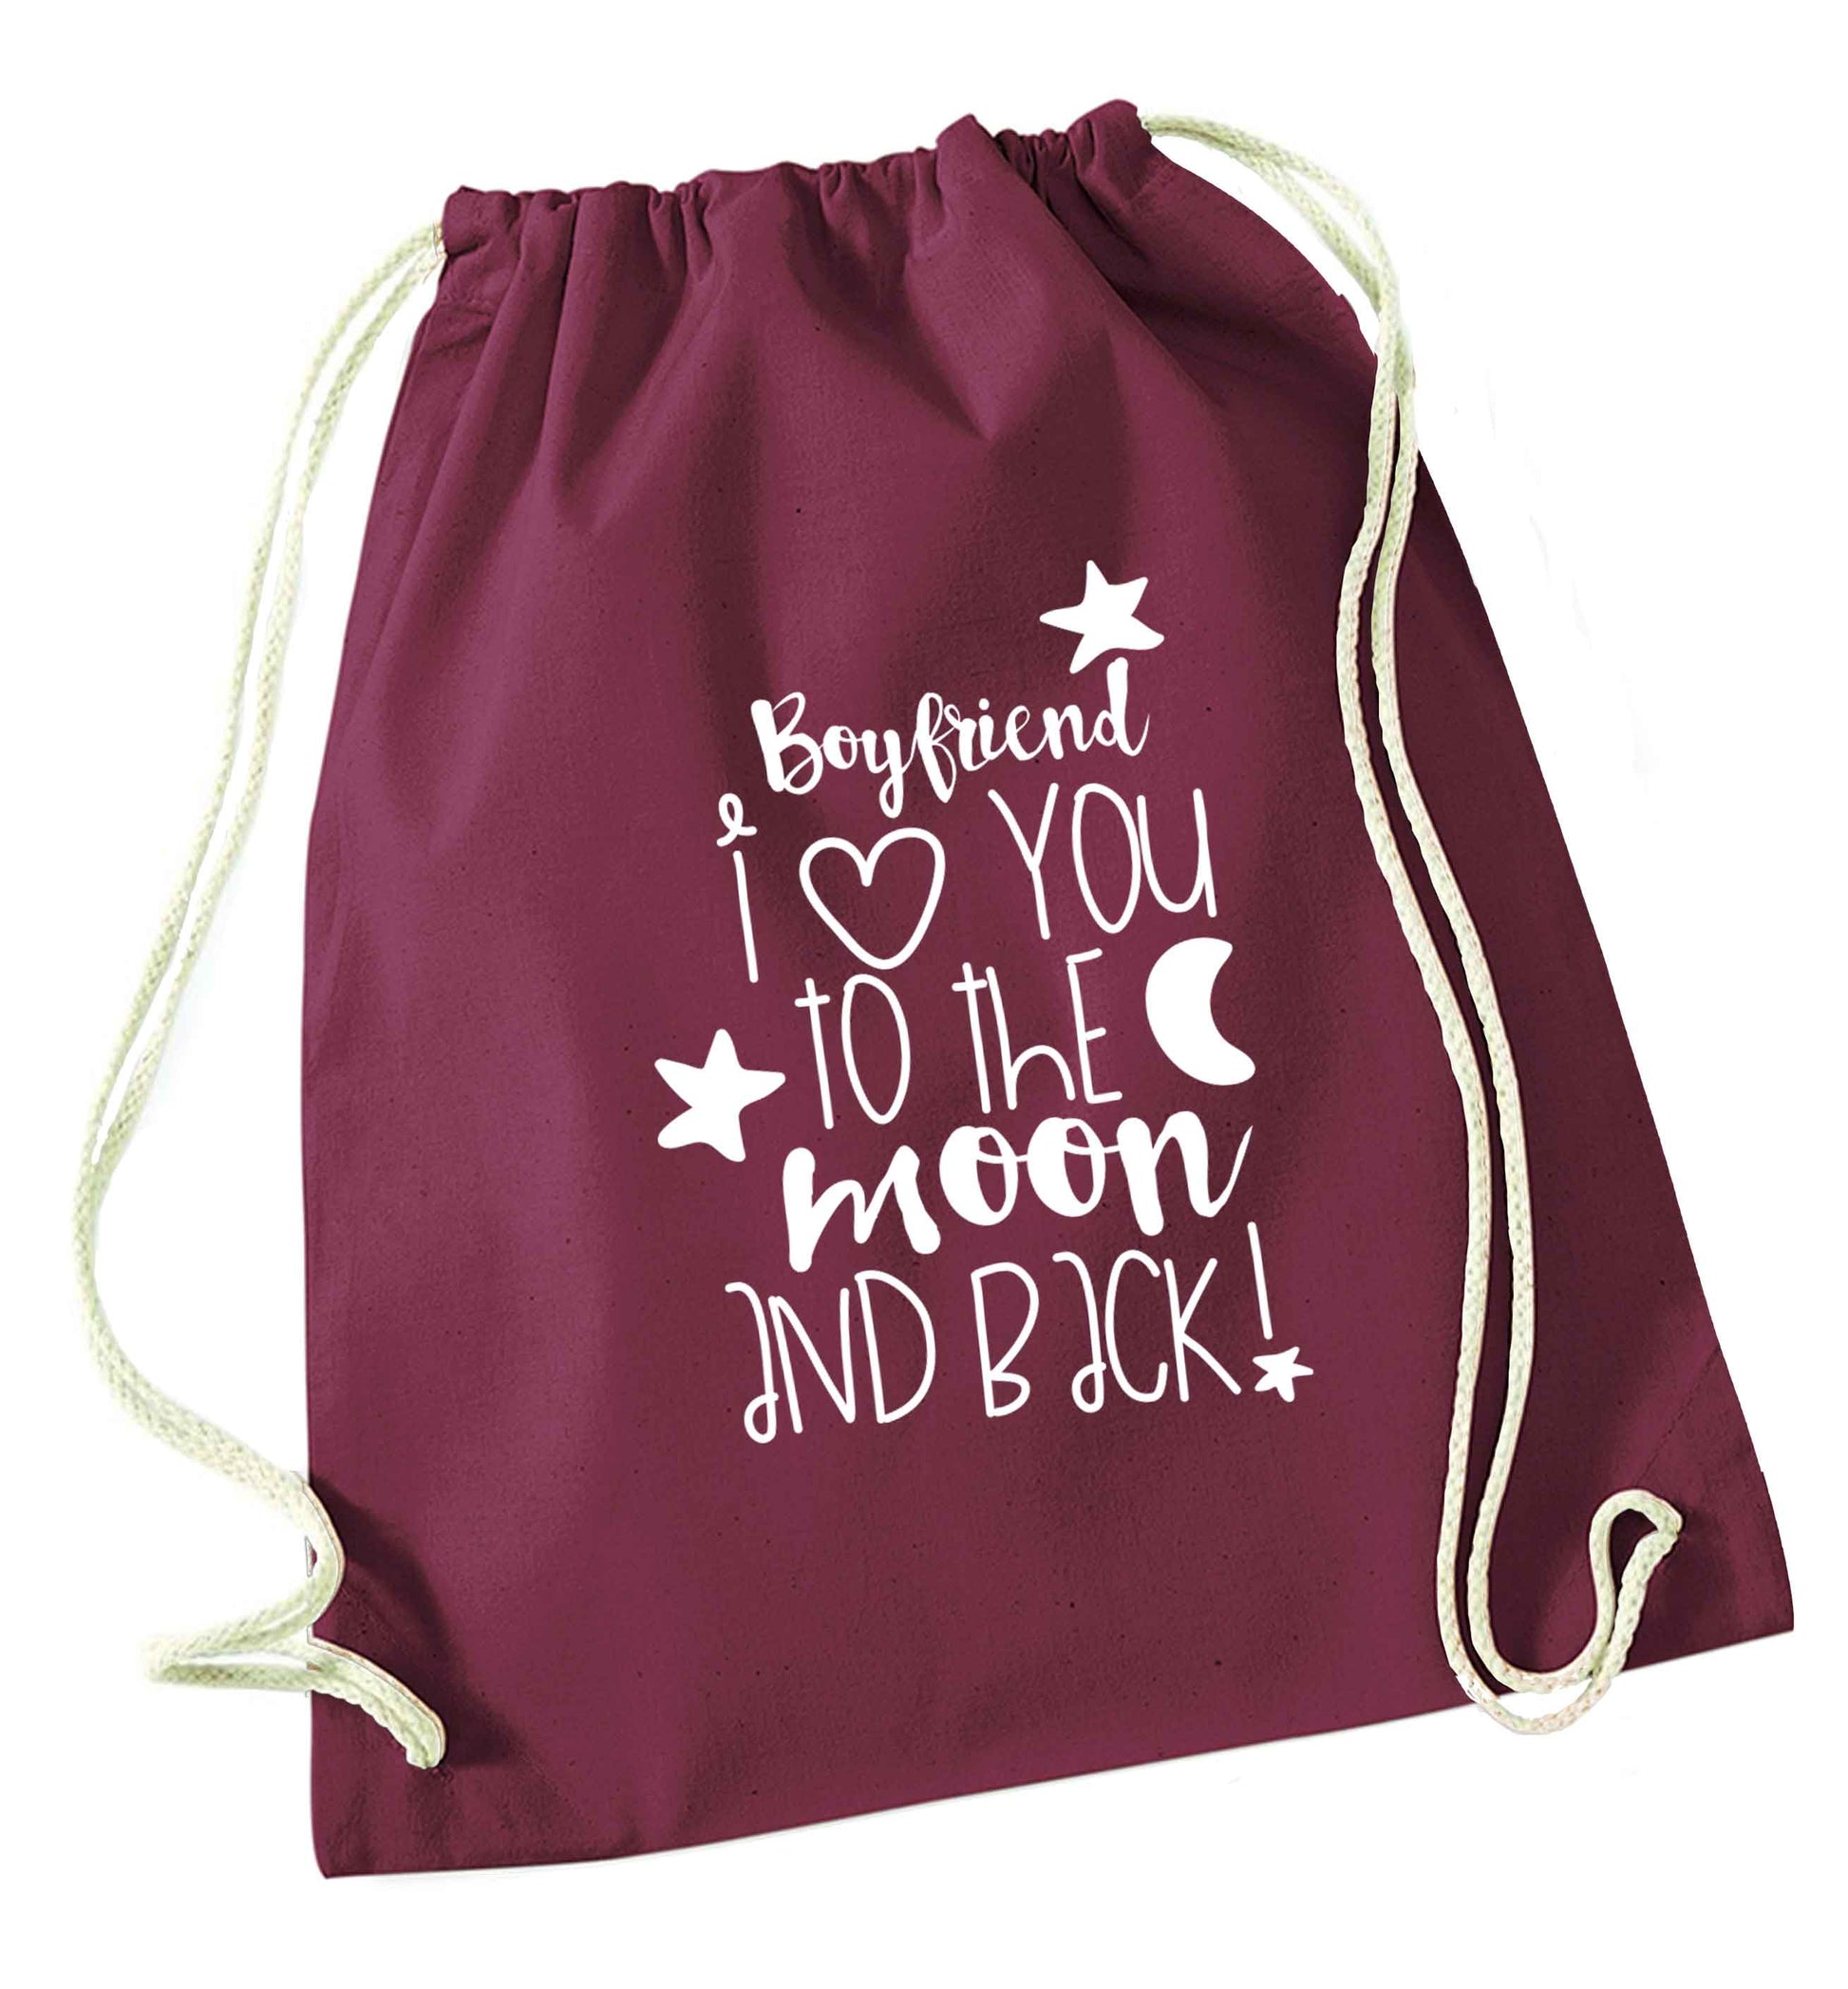 Boyfriend I love you to the moon and back maroon drawstring bag